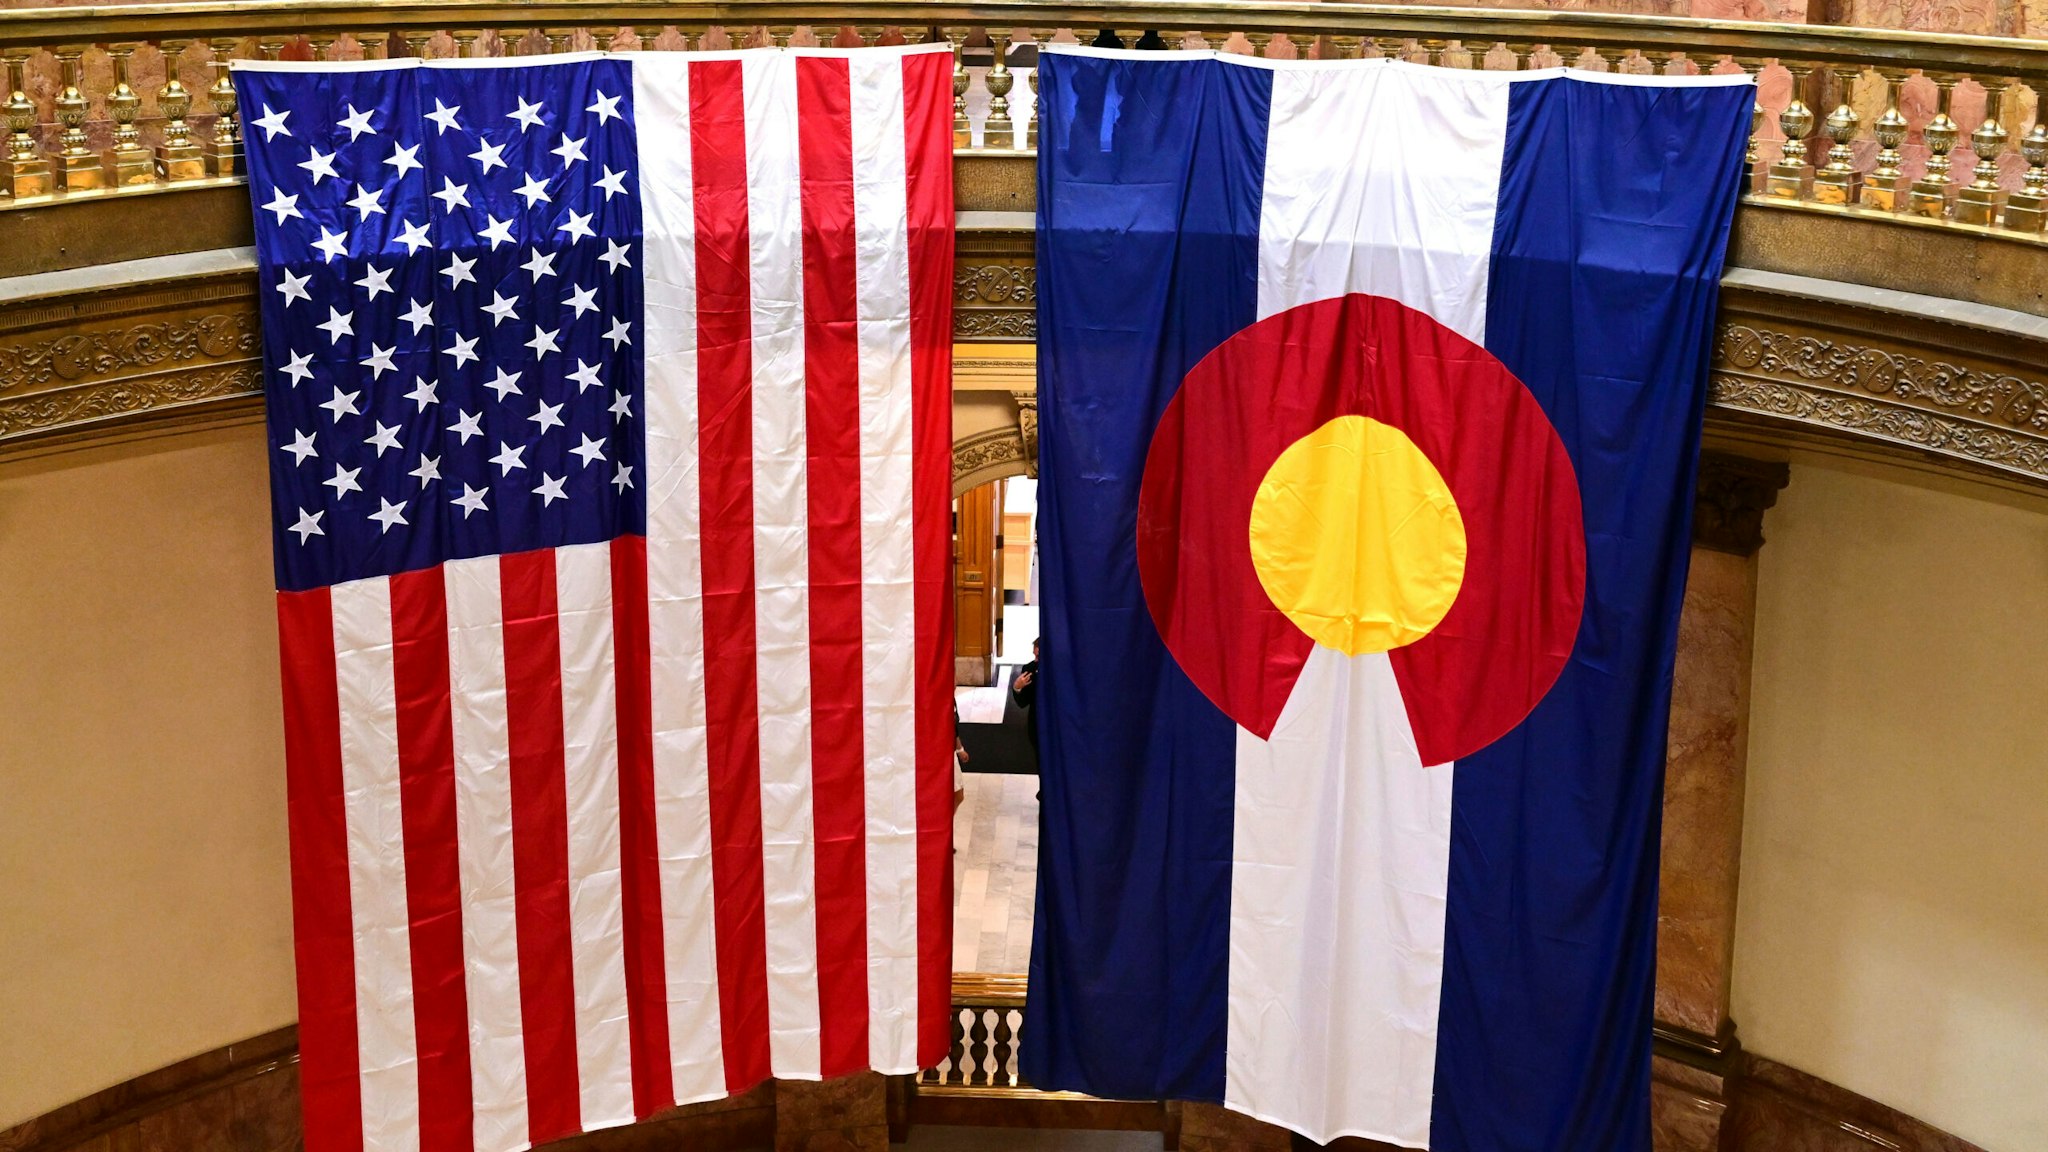 DENVER, CO - JANUARY 9: An American flag and Colorado flag hang in the rotunda at the State Capitol during the opening day session of the 2023 Colorado Legislative session on January 9, 2023 in Denver, Colorado.